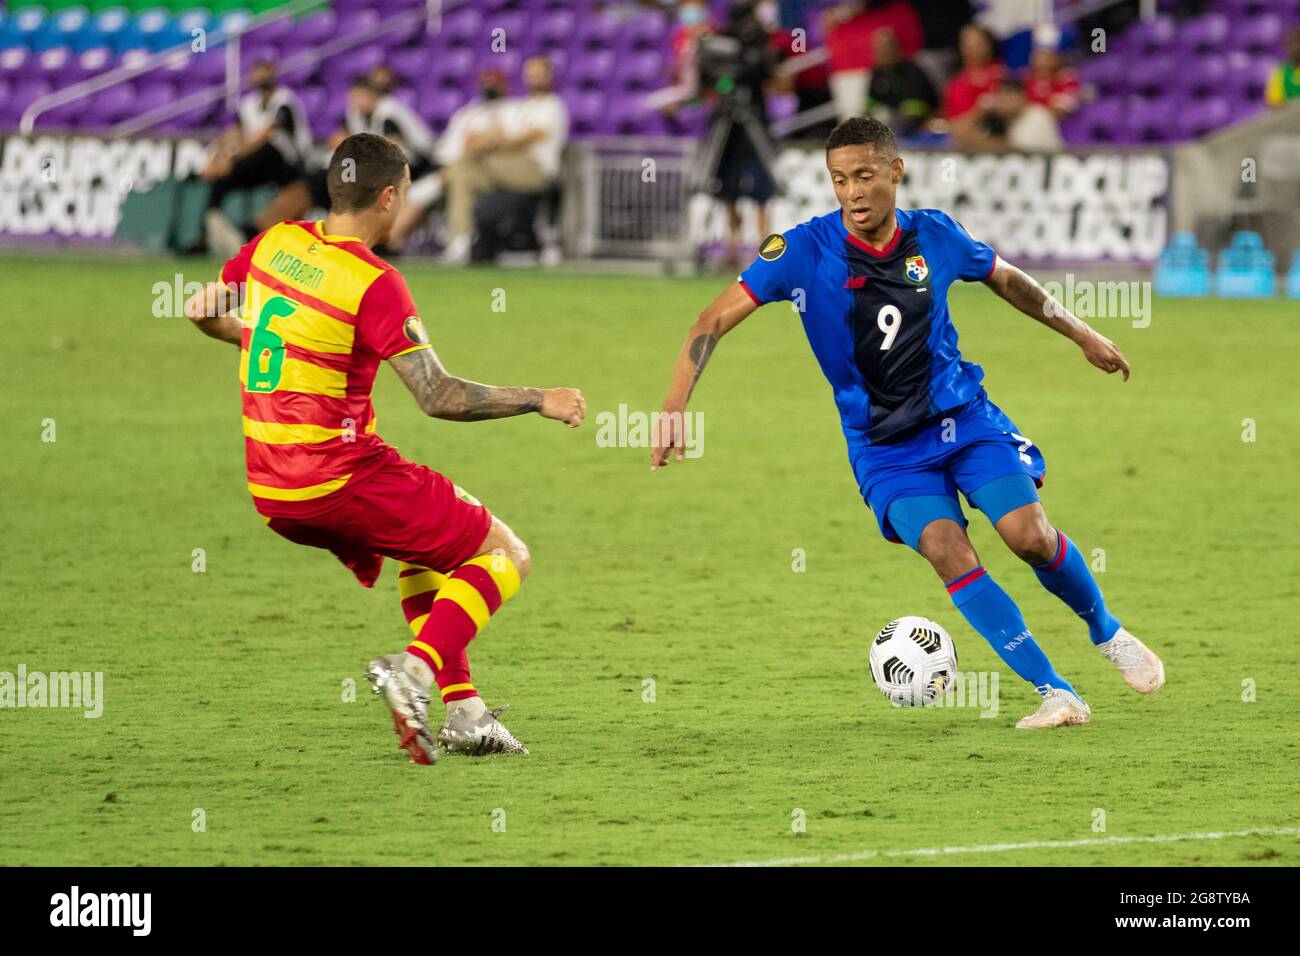 Orlando, United States. 21st July, 2021. Gabriel Torres (9 Panama) maintains the ball in possession at the top of the box during the CONCACAF Gold Cup game between Panama and Grenada at Exploria Stadium in Orlando, Florida. NO COMMERCIAL USAGE. Credit: SPP Sport Press Photo. /Alamy Live News Stock Photo